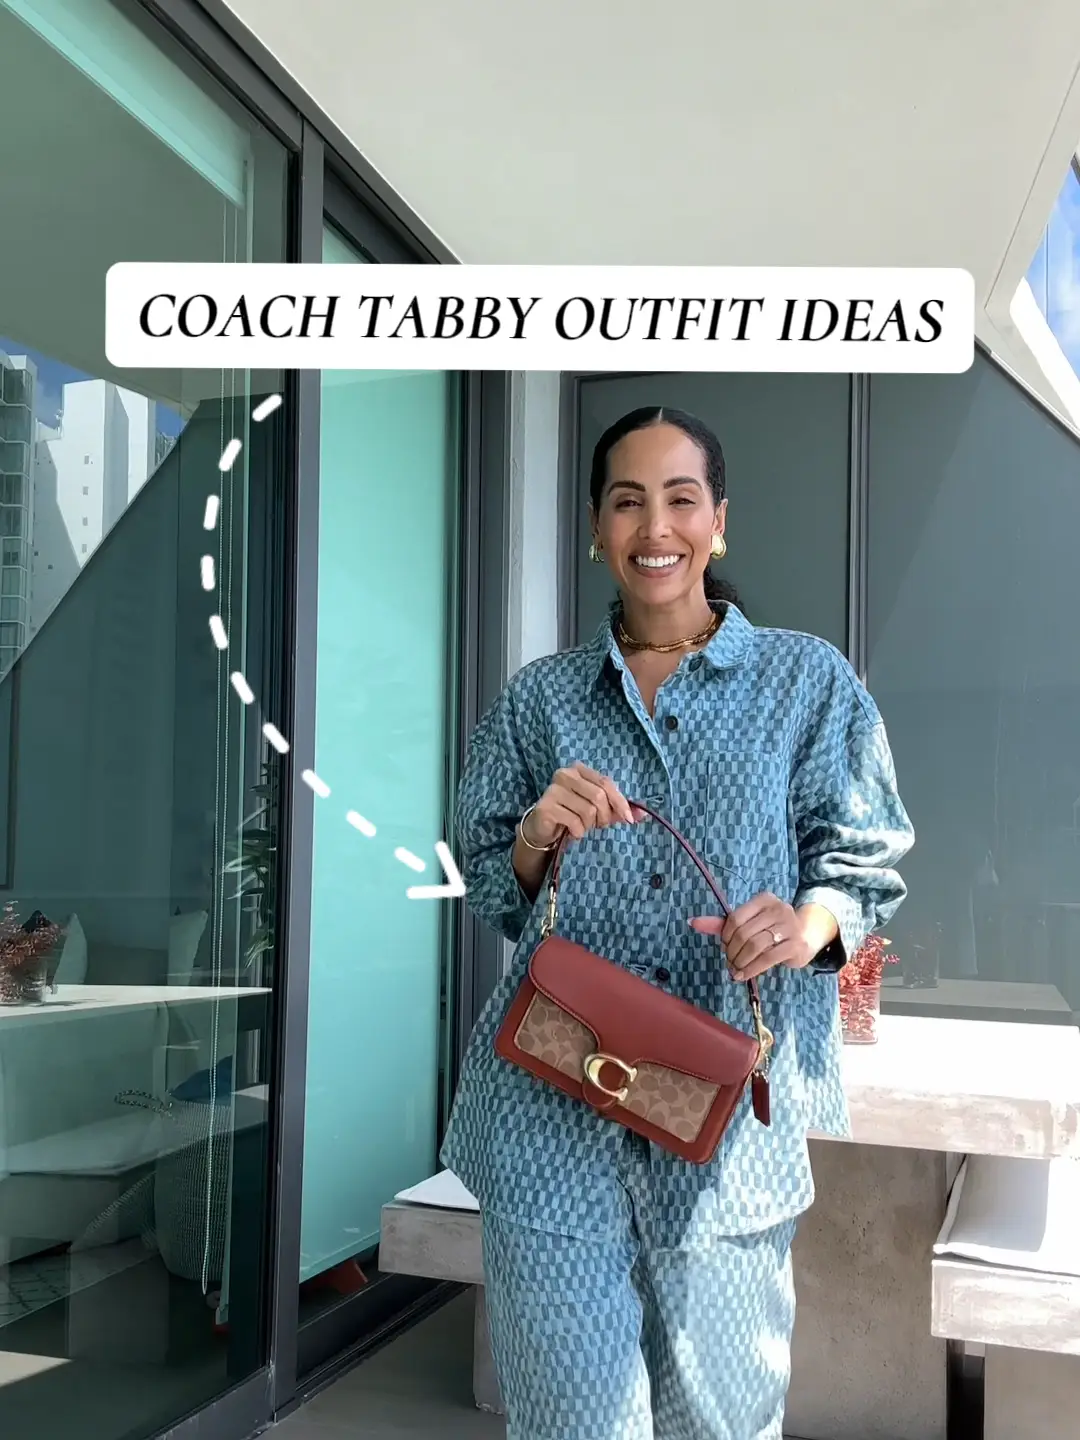 Styling my Coach Pillow Tabby🤍 which outfit is your fave